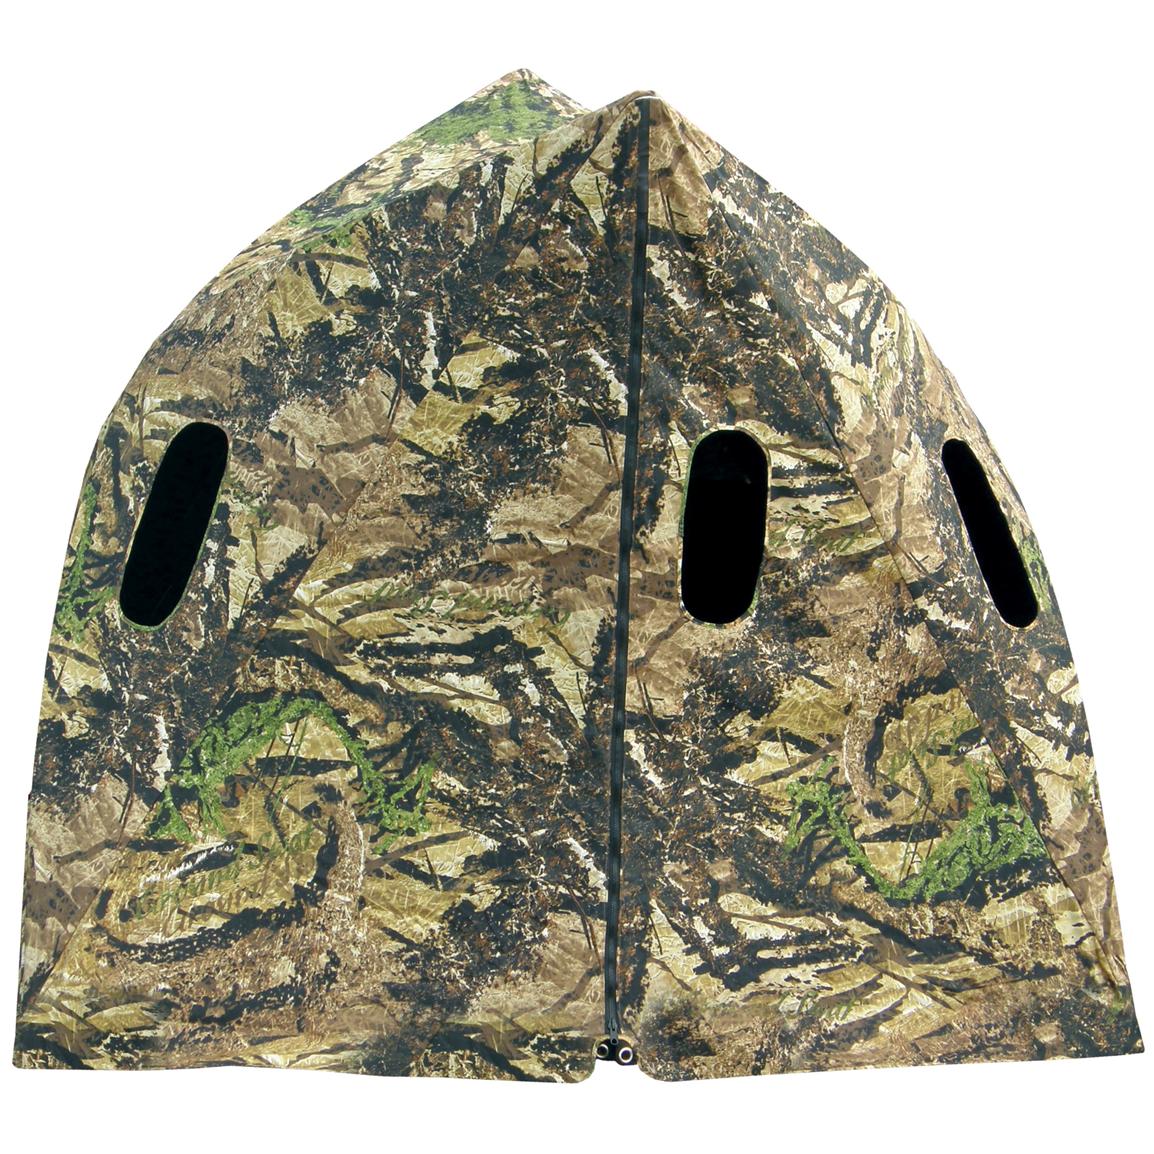 Primos® Double Bull T2™ Blind - 159148, Ground Blinds at Sportsman's Guide